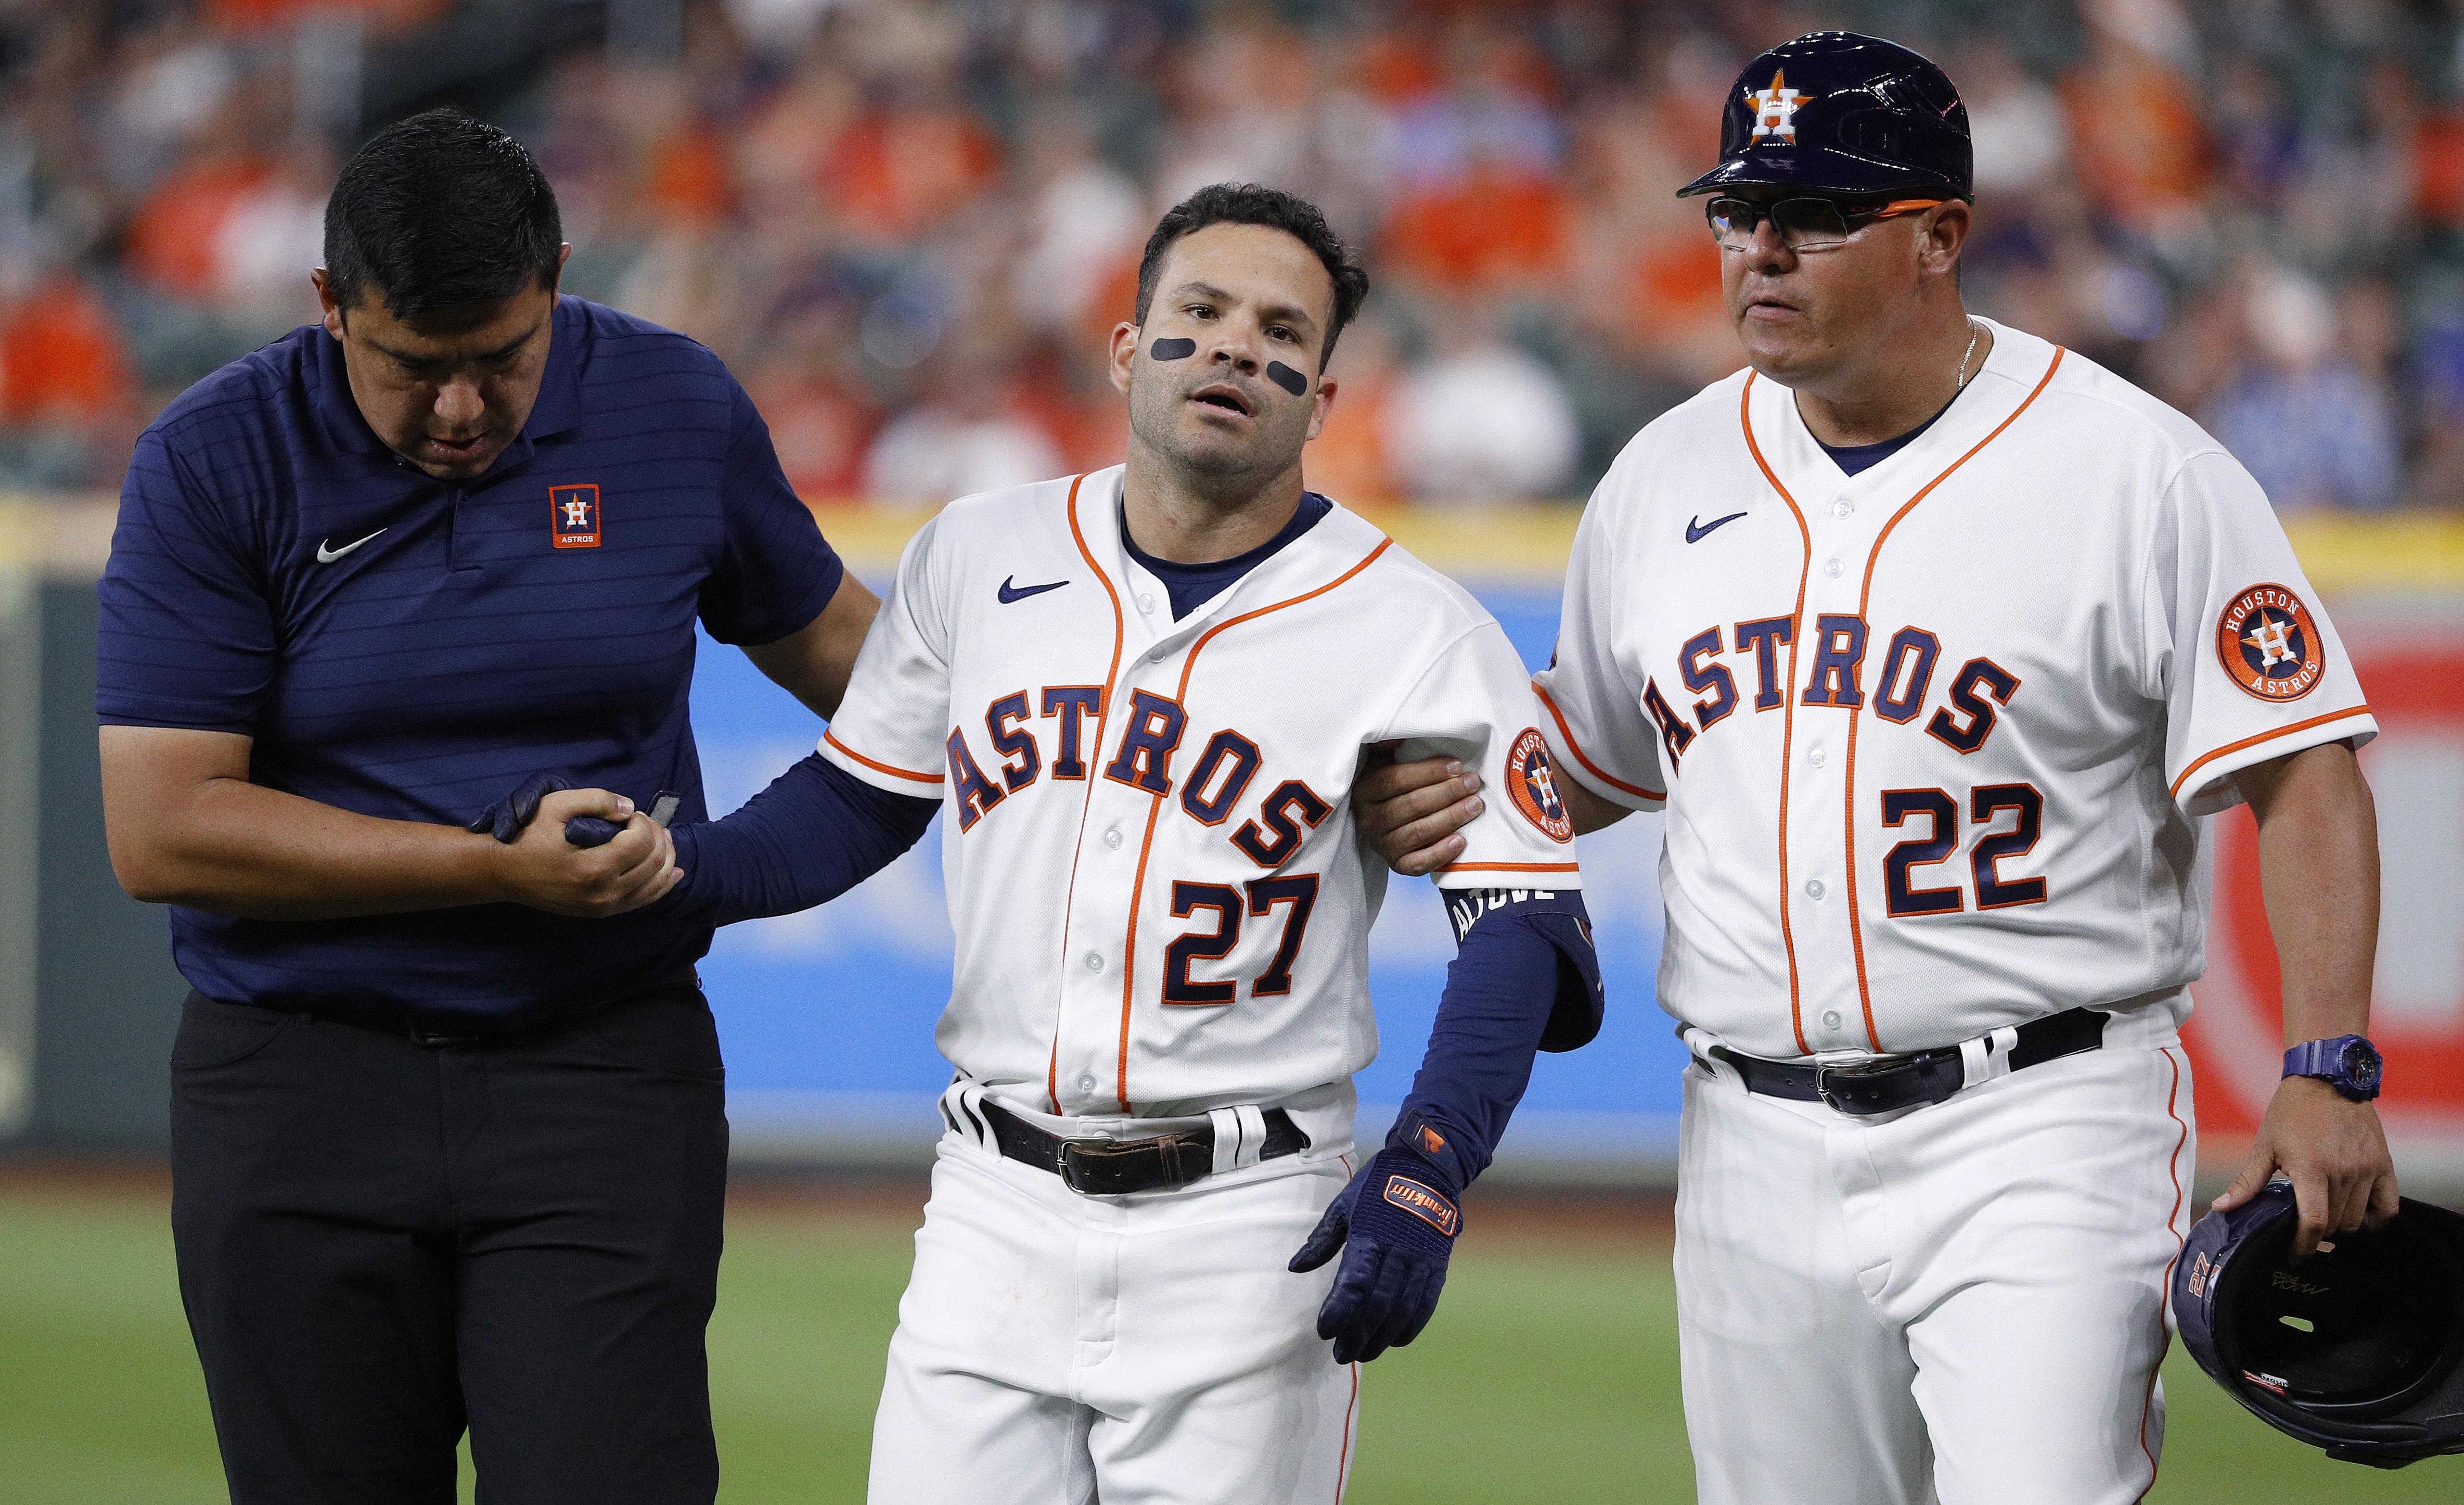 Altuve comes up big again as Astros take 3-2 lead, Sports